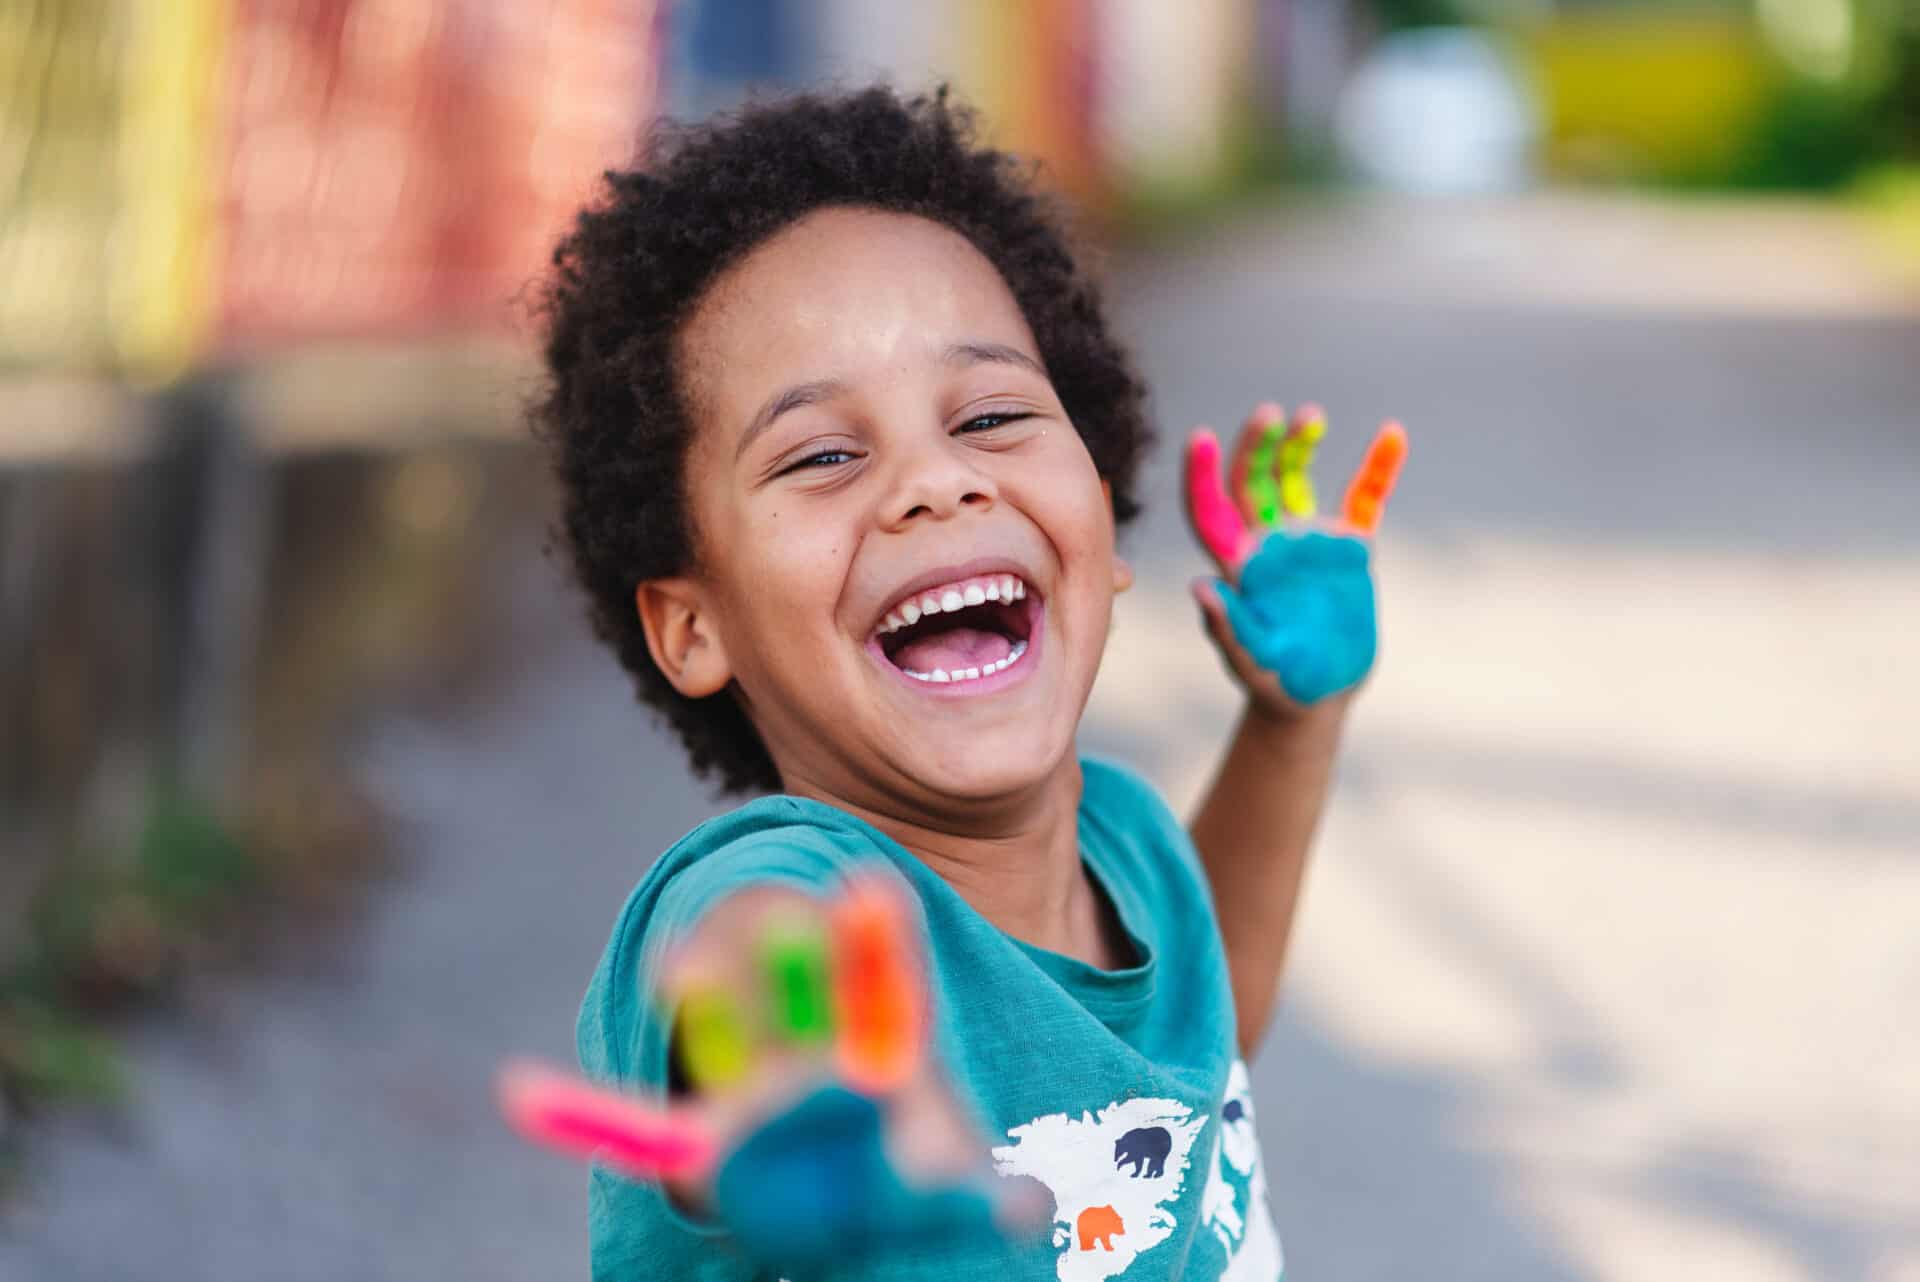 Happy young person with painted hands